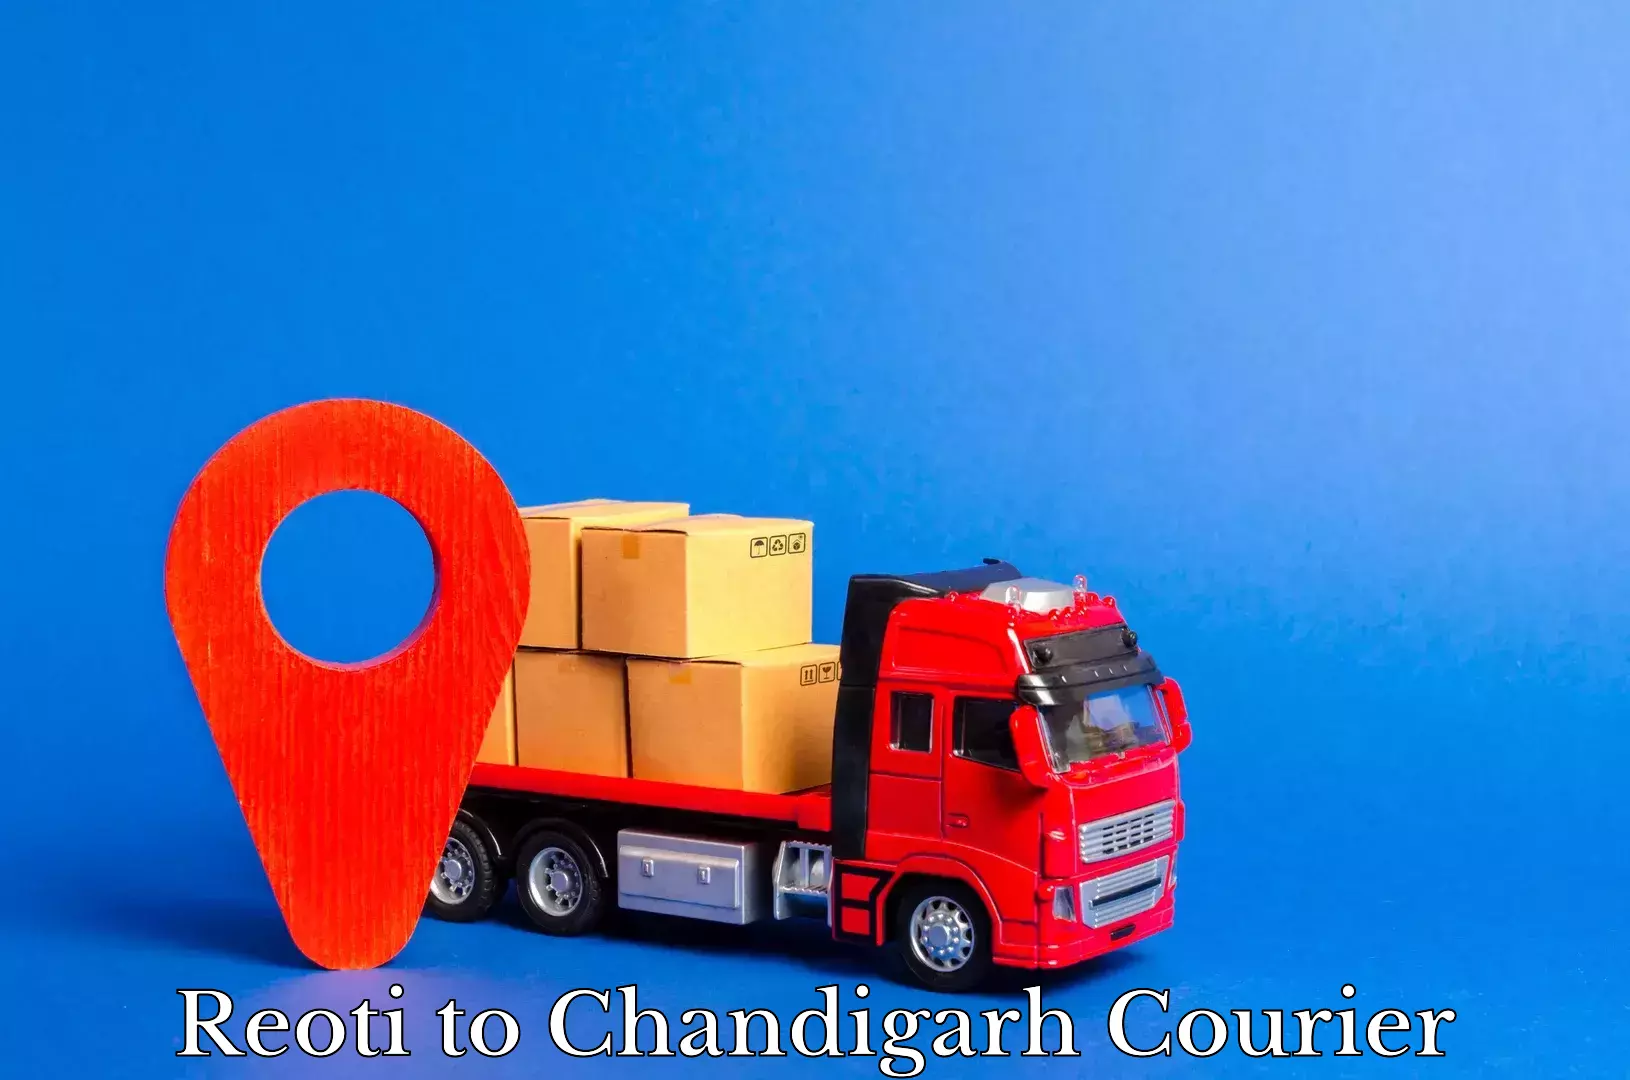 Business delivery service Reoti to Chandigarh